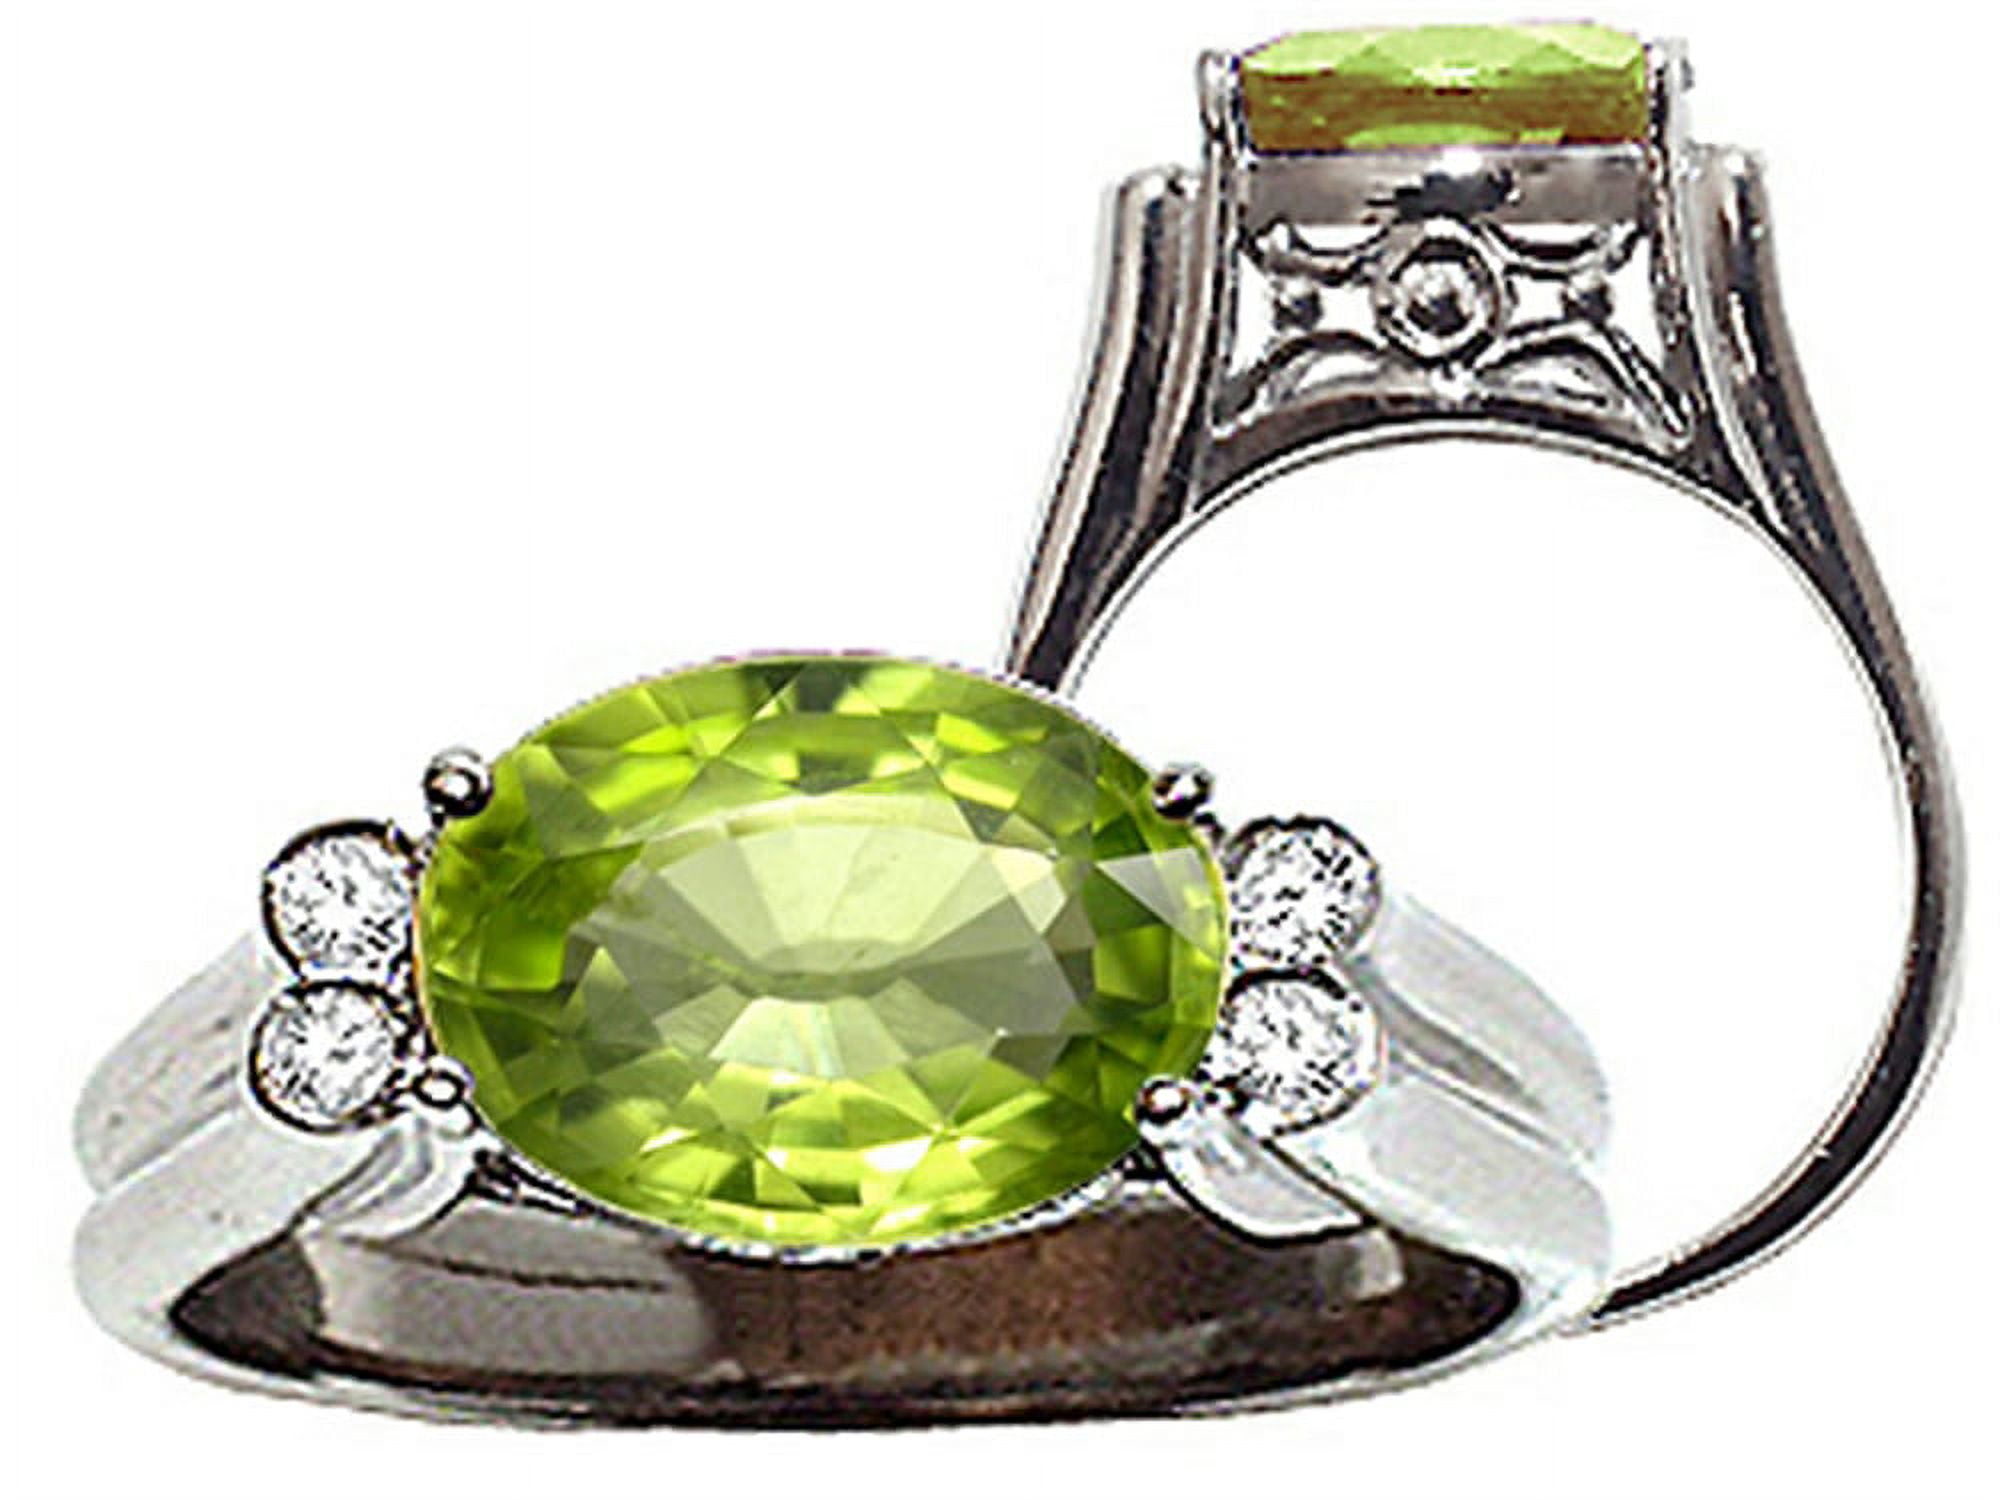 Buy Genuine Peridot Ring, Crystal, Gemstone Ring, Titanium, Tungsten,  Wedding Ring, Promise Ring, Anniversary Band, for Him, for Her, 6mm, 8mm  Online in India - Etsy